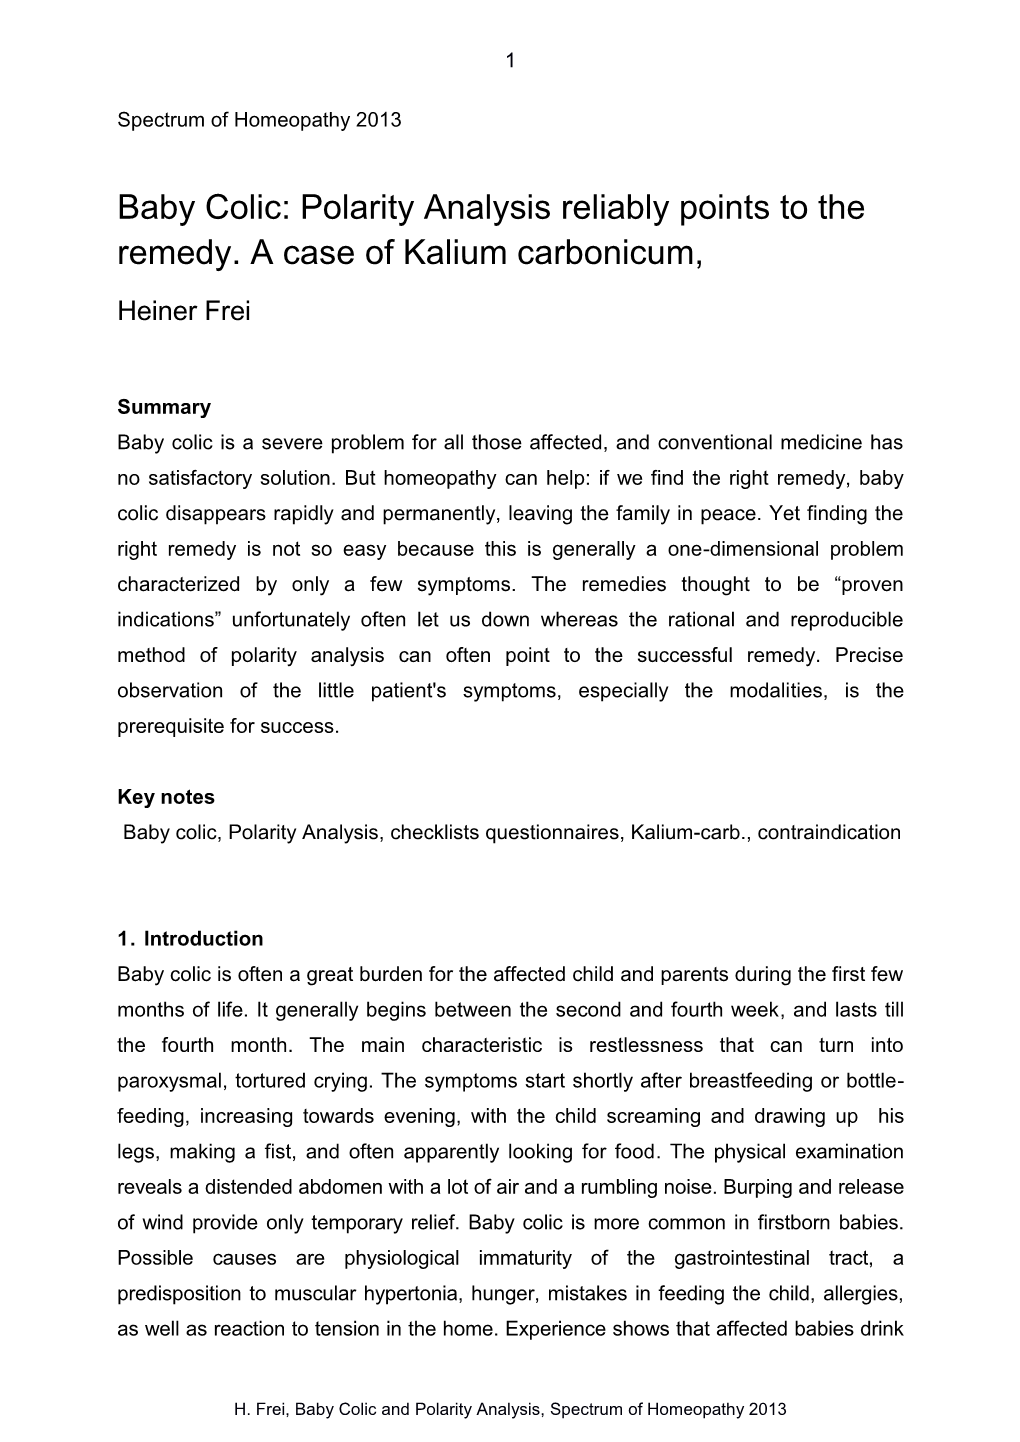 Baby Colic: Polarity Analysis Reliably Points to the Remedy. a Case of Kalium Carbonicum, Heiner Frei